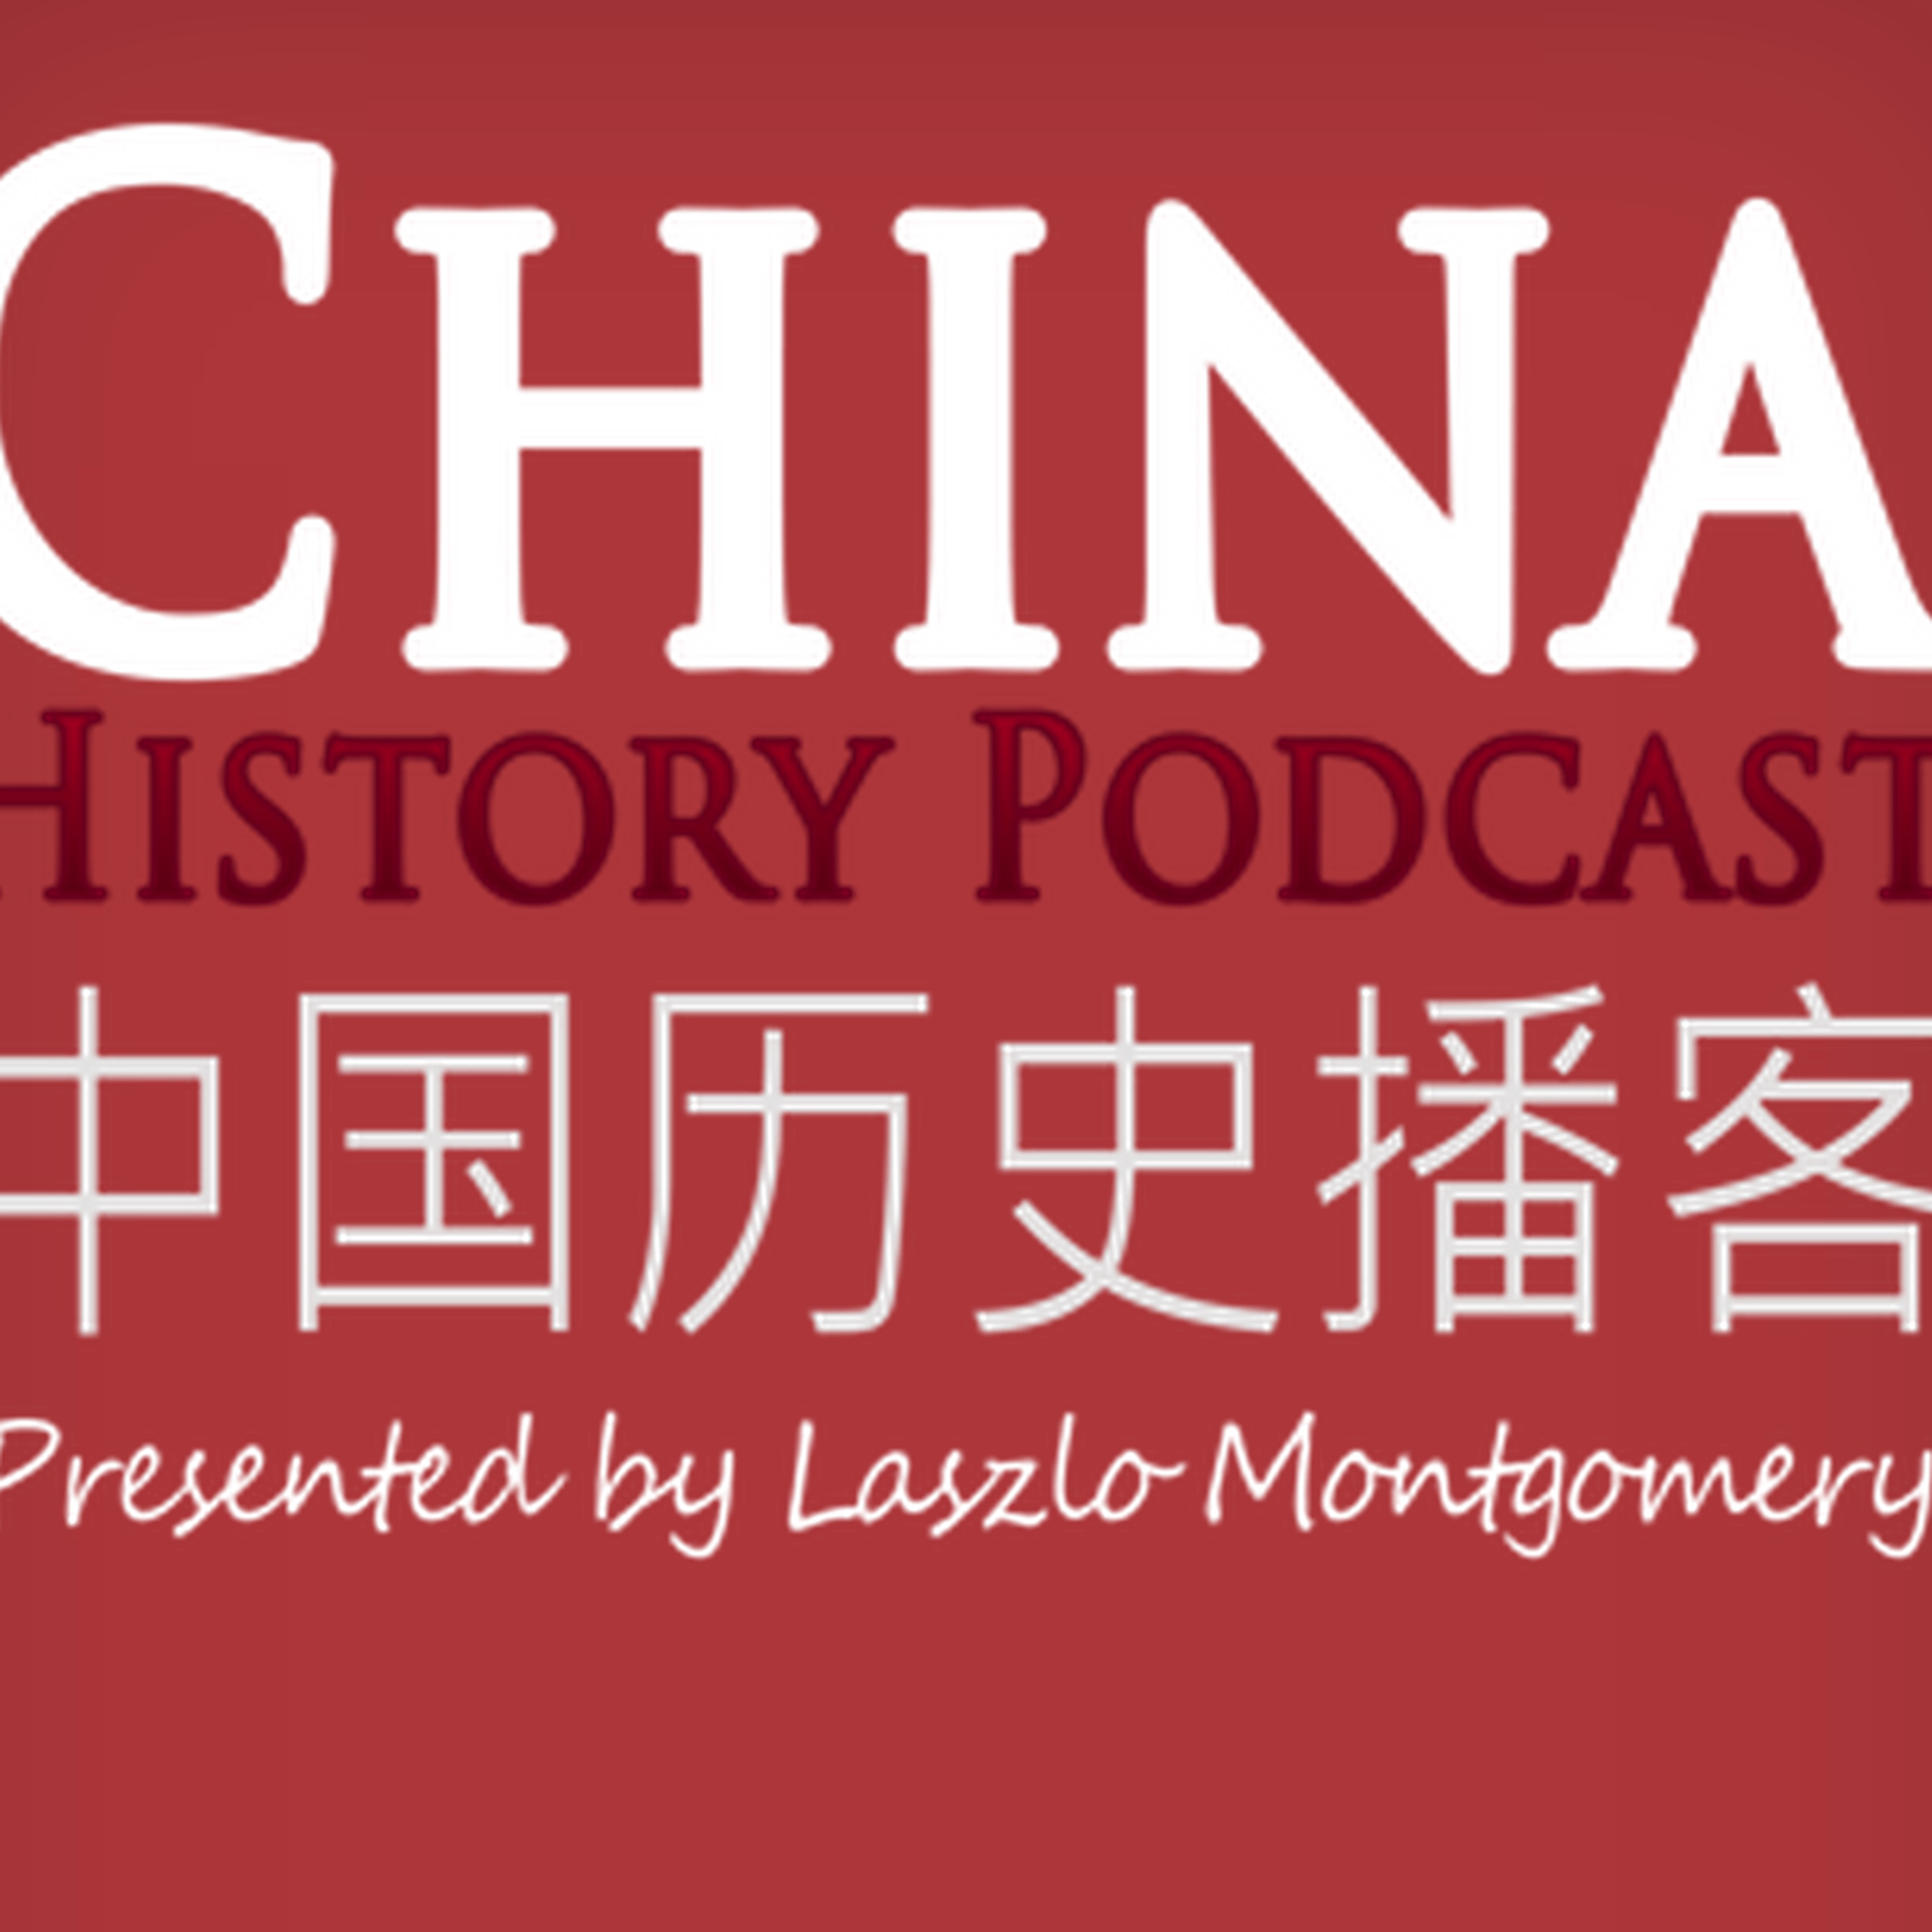 cover art for Laszlo from the China History Podcast chats over Tea